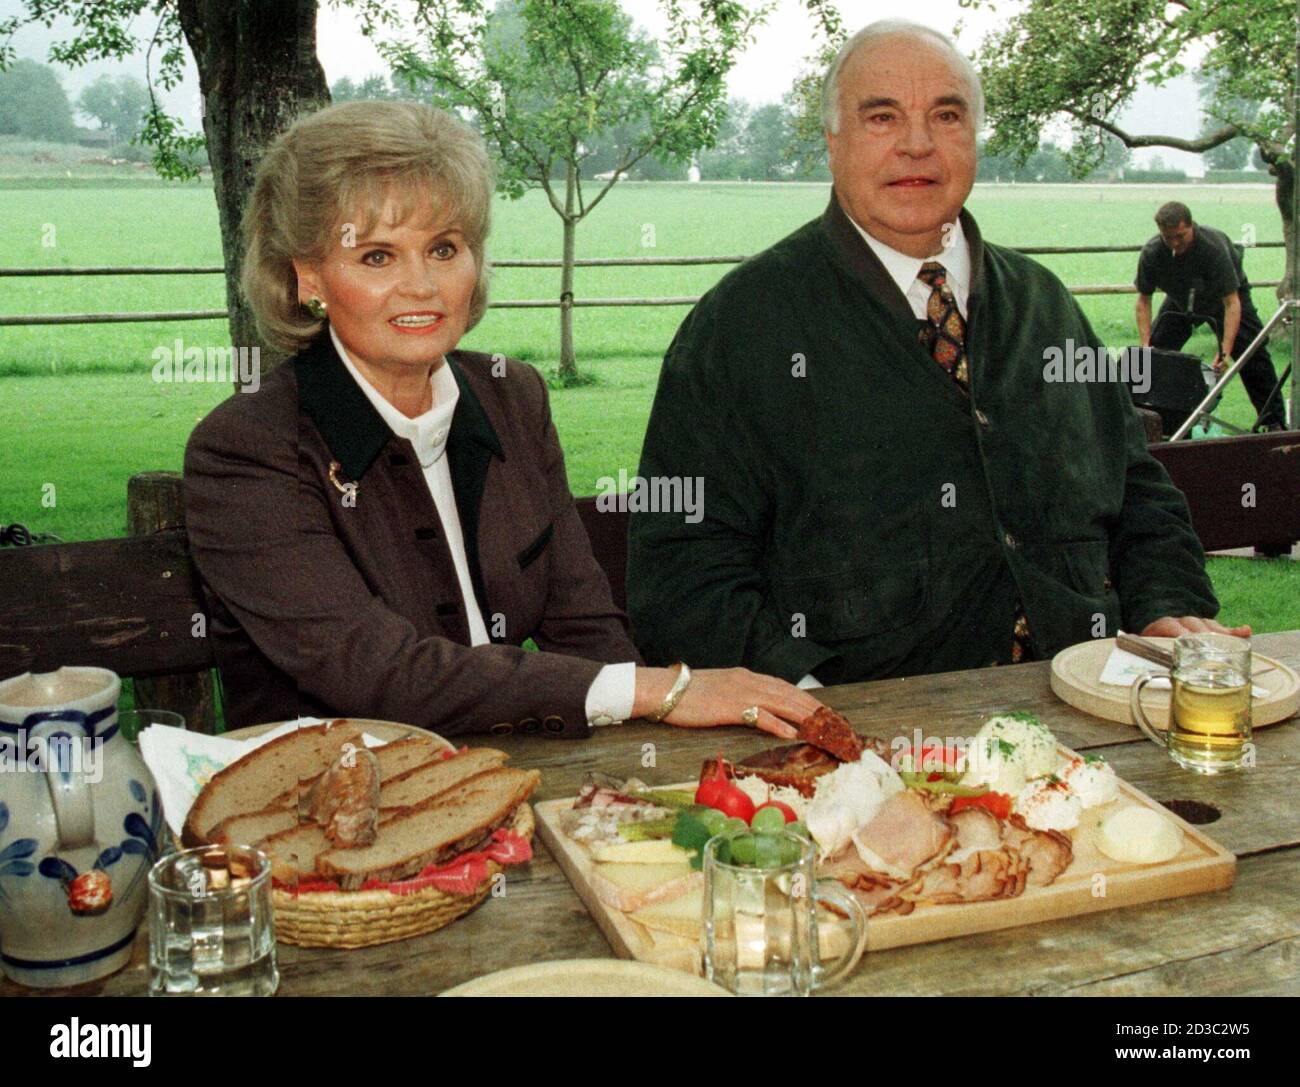 A file photo from August 4, 1998 shows German Helmut Kohl (R) and his wife enjoying traditional Austrian snack in the garden of their Austrian holiday resort in